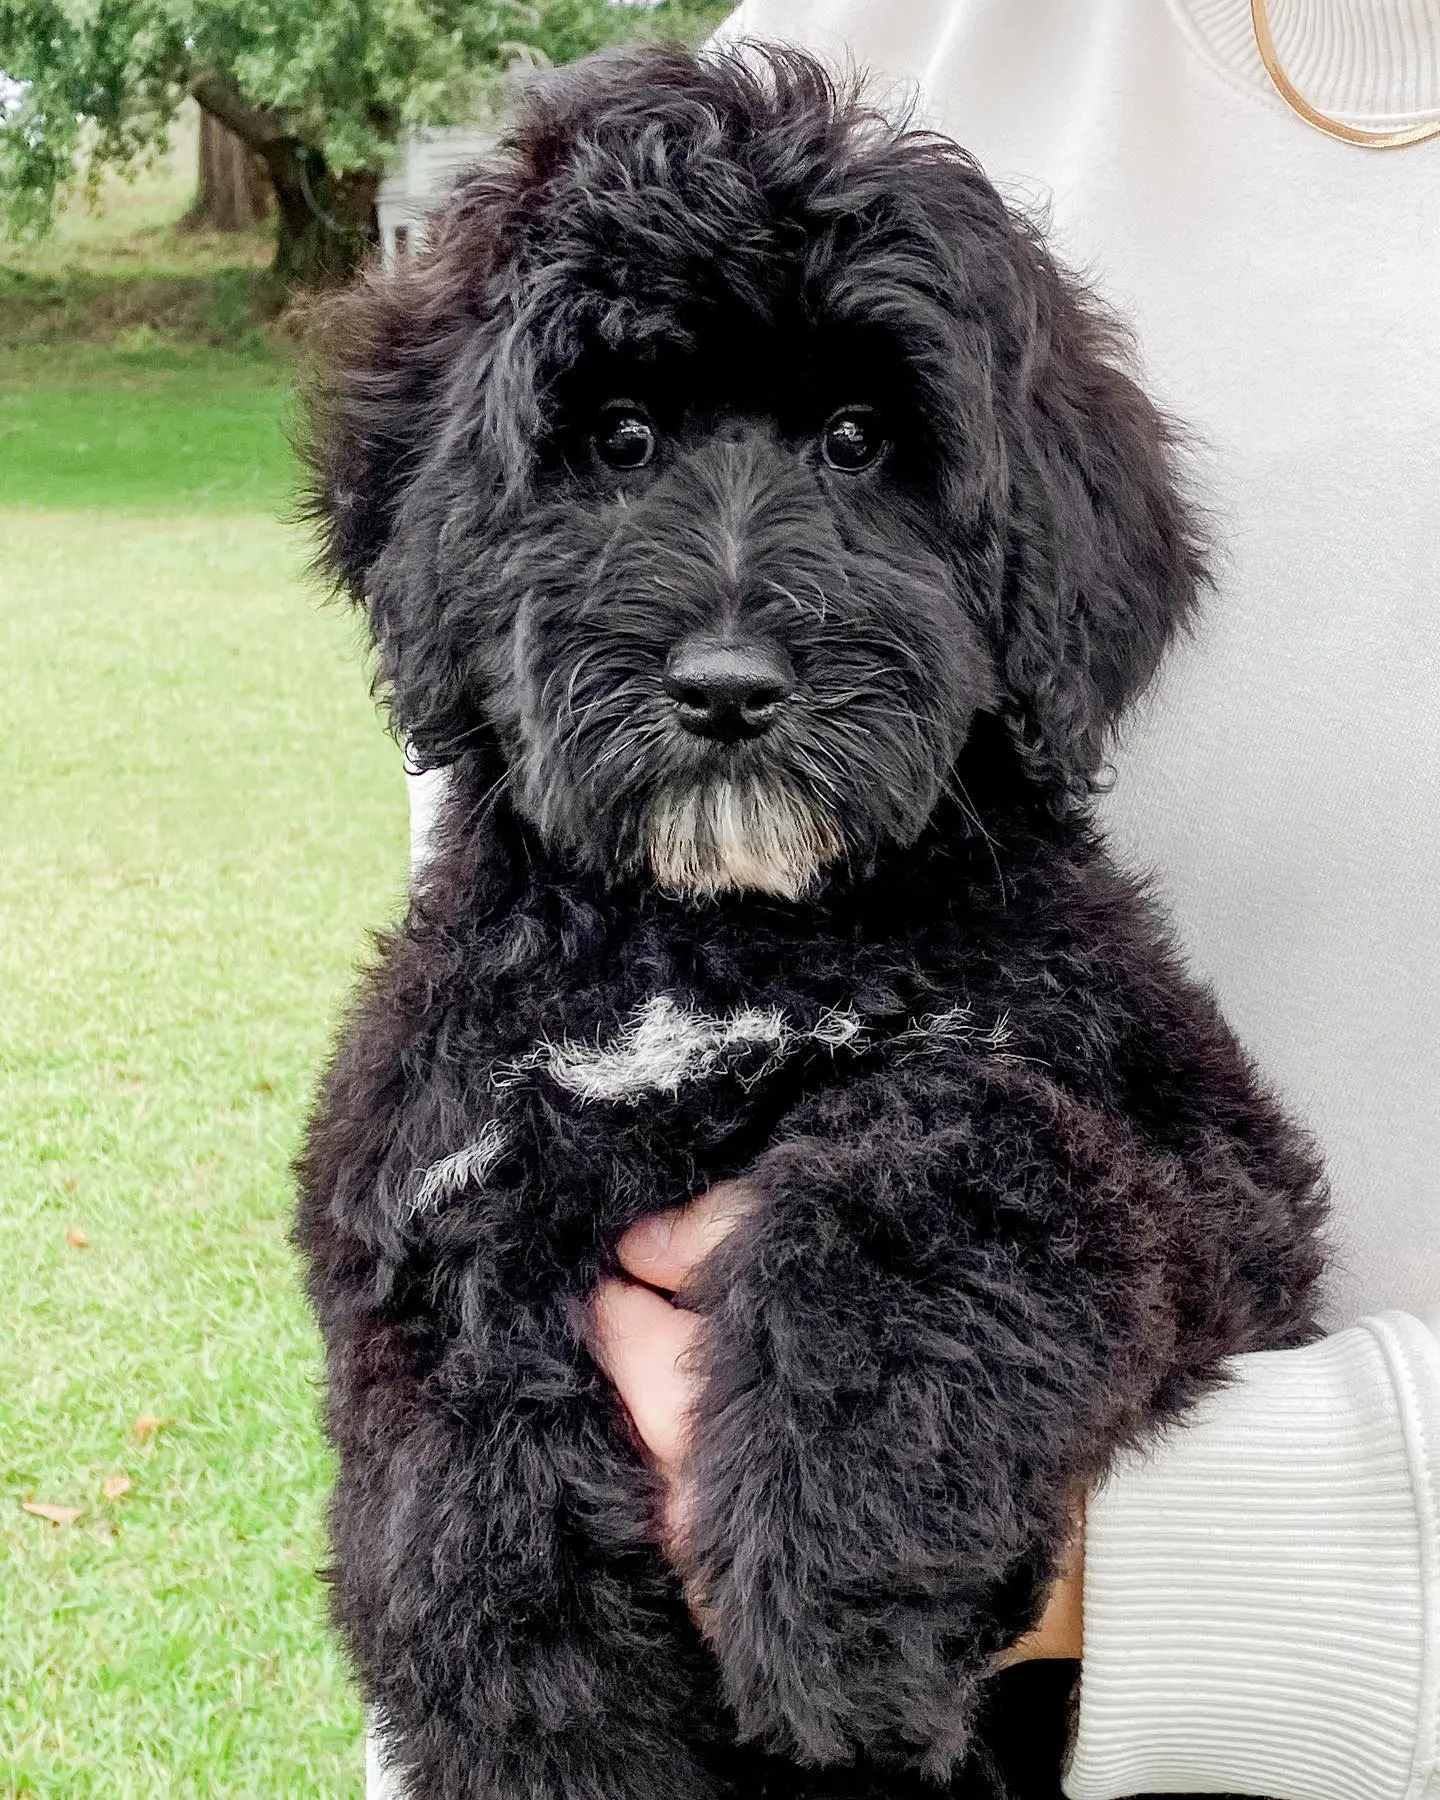 The Smeraglia Teddybear Goldendoodle is a beautiful, deep black color. This unique coloring makes them stand out from other Goldendoodles, and makes them a popular choice for pet owners. They are also allergy-friendly, which makes them a great choice for families with allergies.